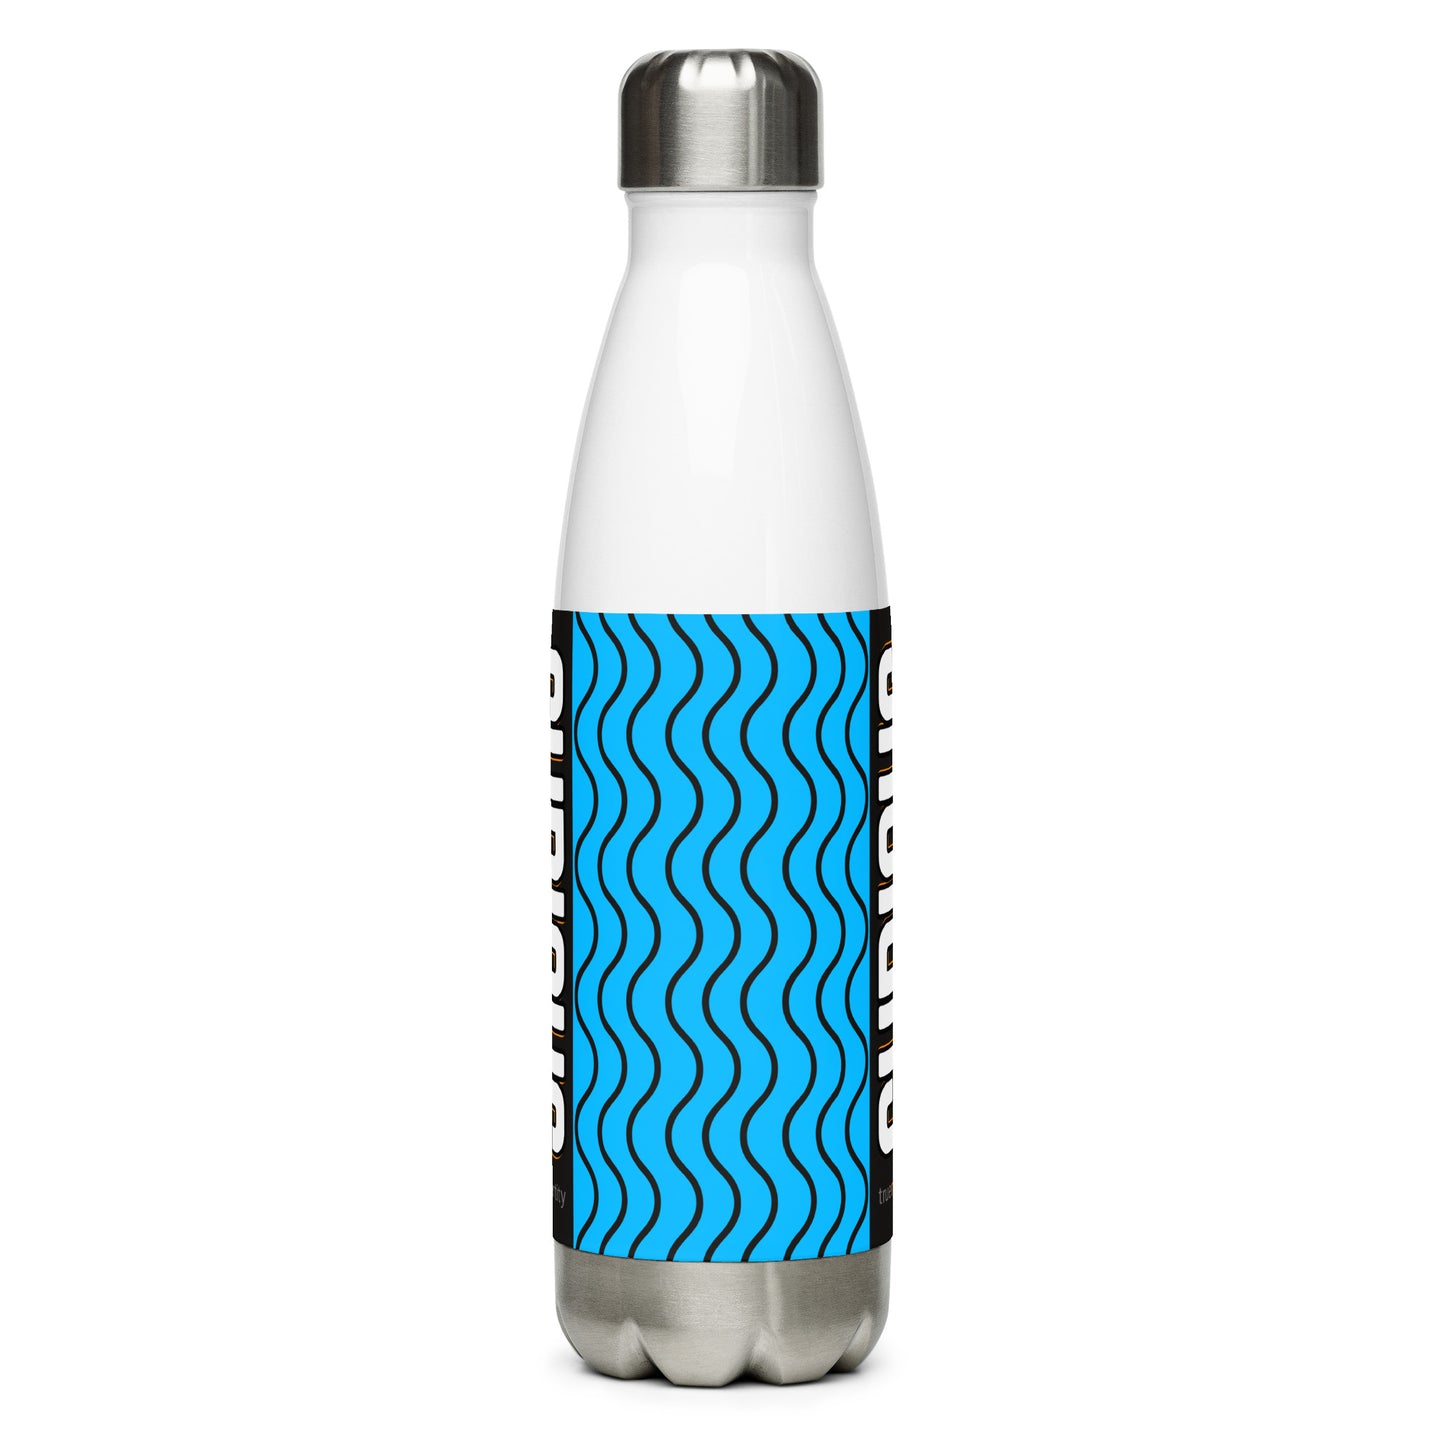 CURIOUS Stainless Steel Water Bottle Blue Wave Design, 17 oz, in Black or White